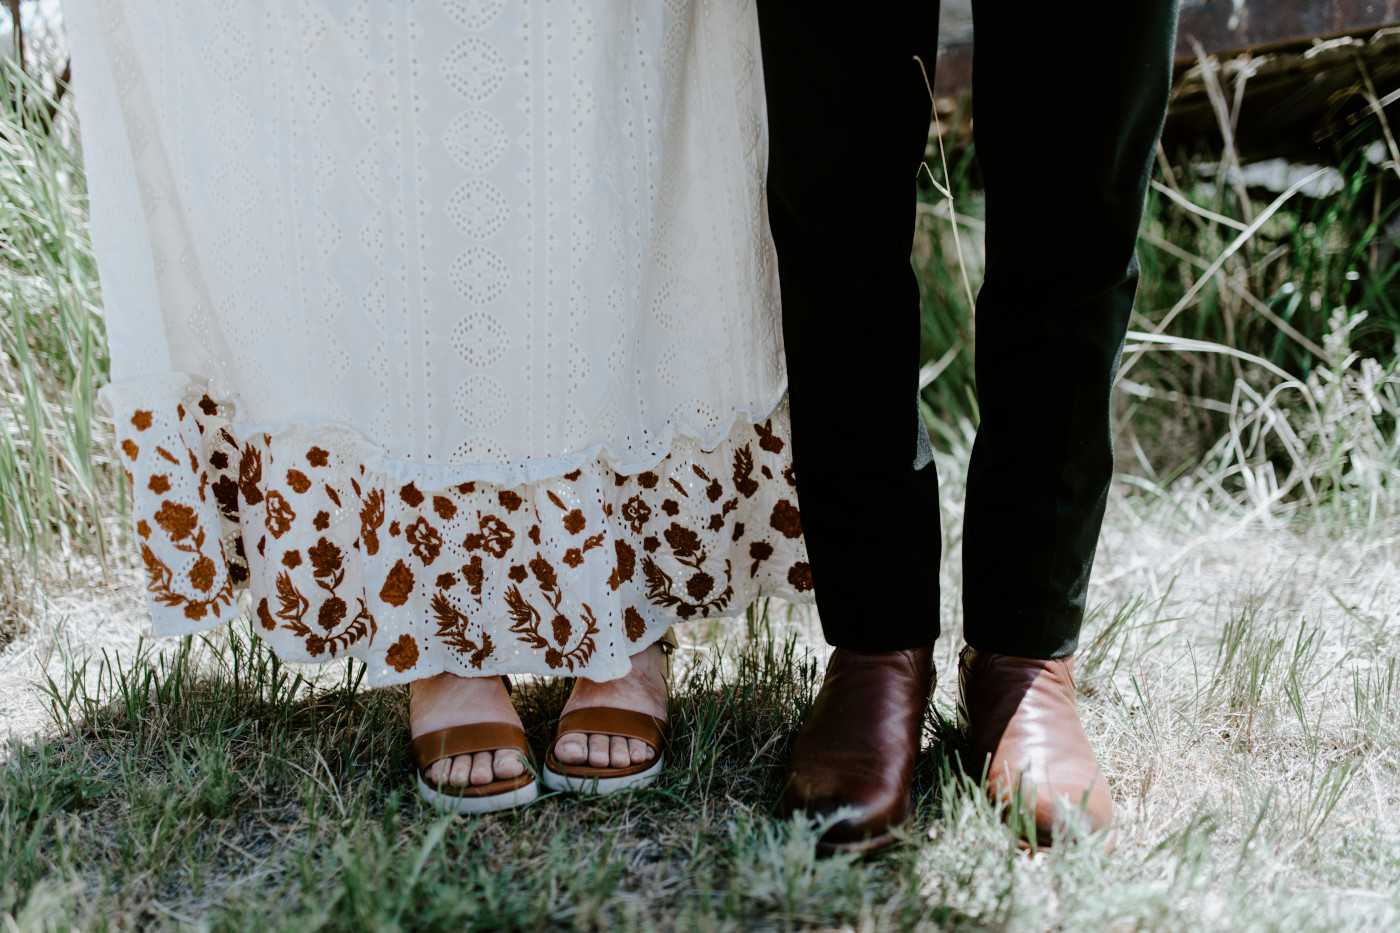 Emily and Greyson stand together to show their shoes. Elopement photography in the Central Oregon desert by Sienna Plus Josh.